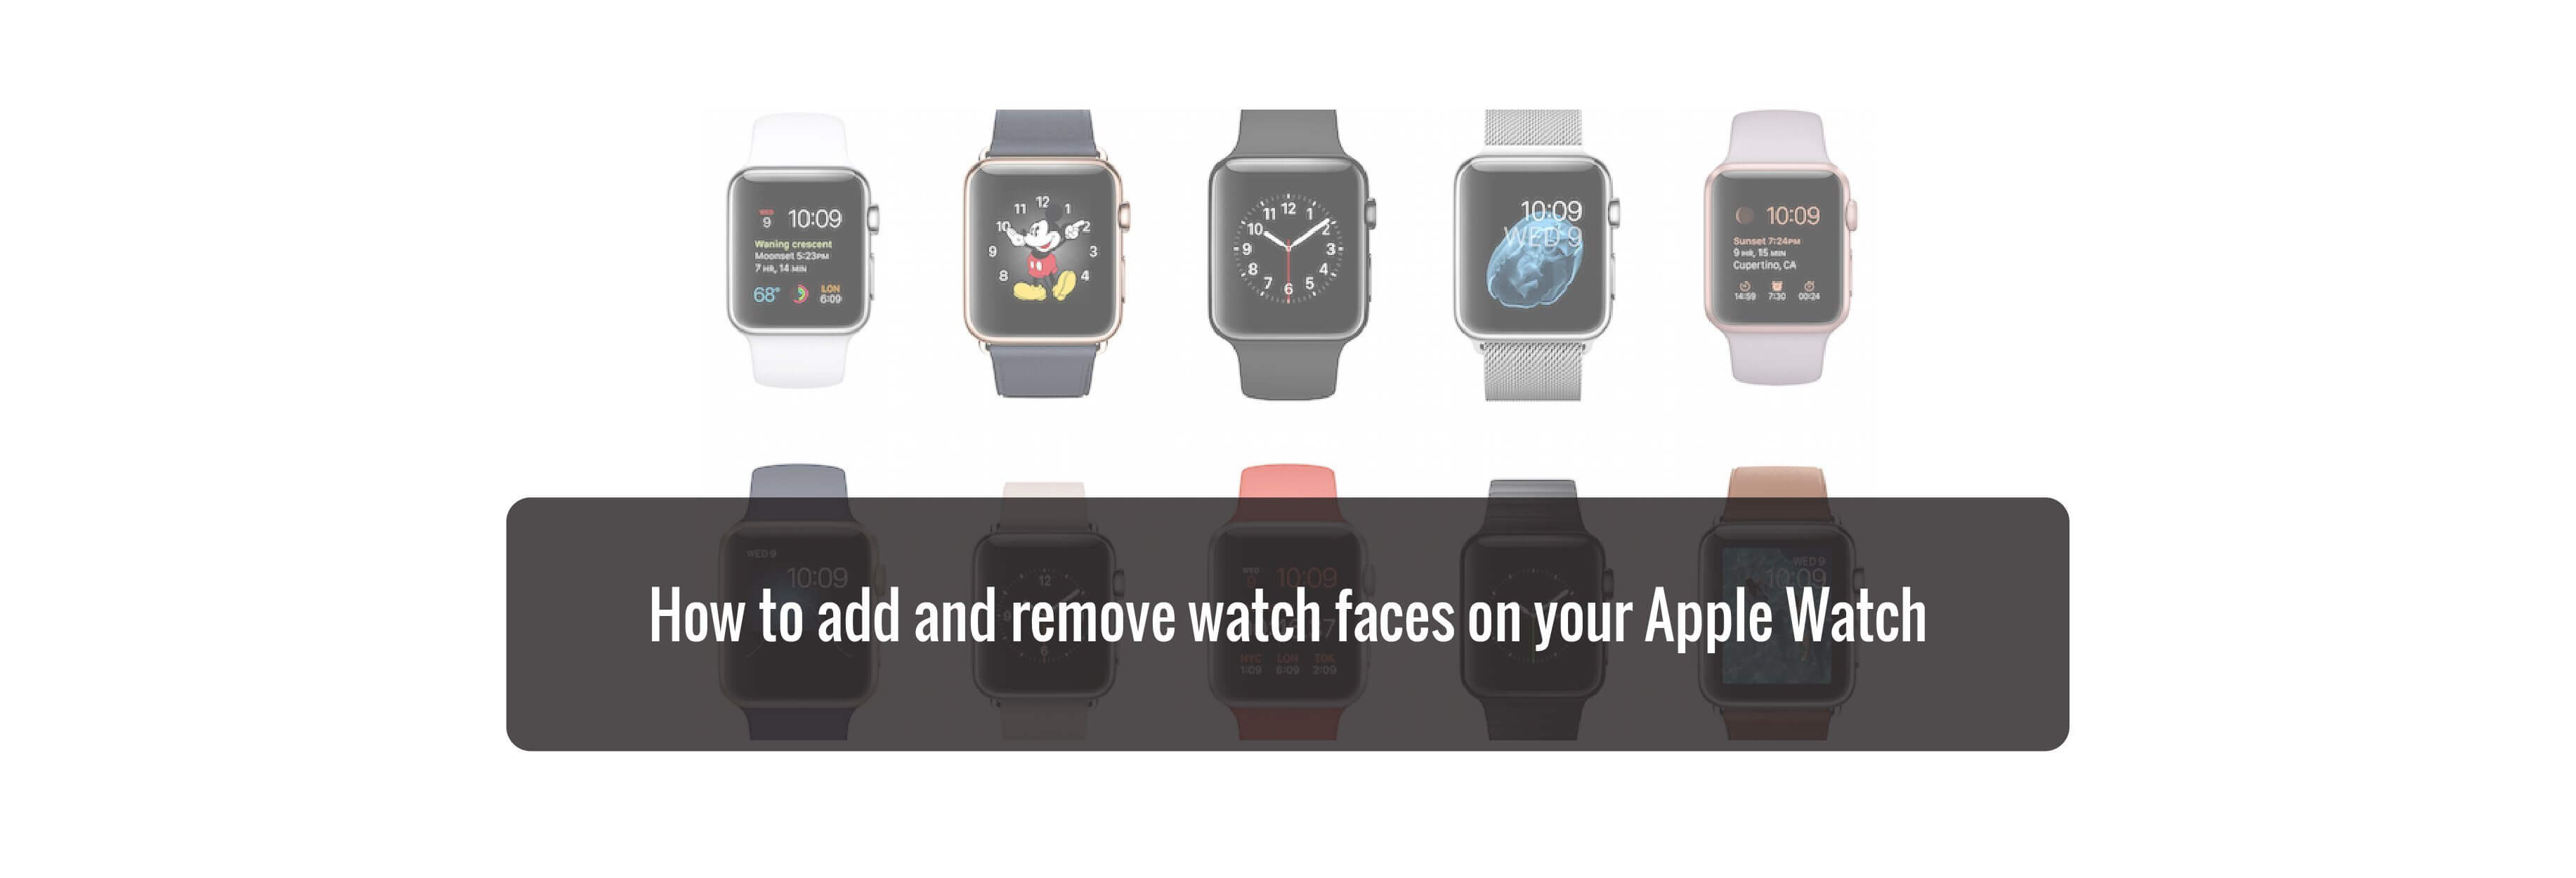 How to add and remove watch faces on your Apple Watch